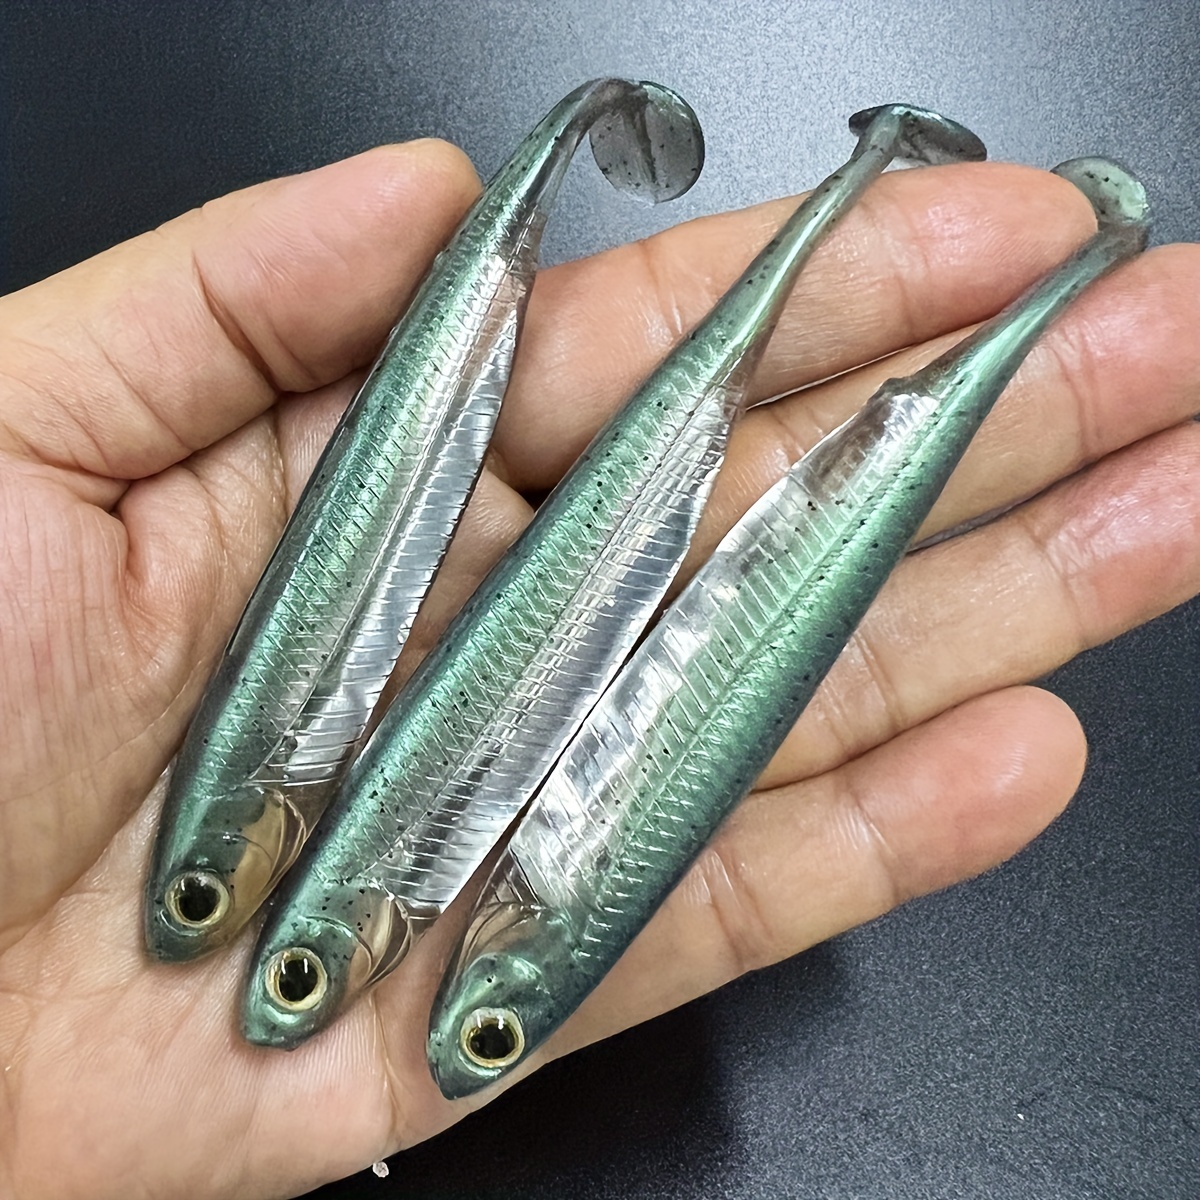 WALK FISH Spinner Bait Metal Fishing Spoon Lure 2.2g Hard Artificial Bait  With Hooks Freshwater Creek Trout Lures Fishing Tackle